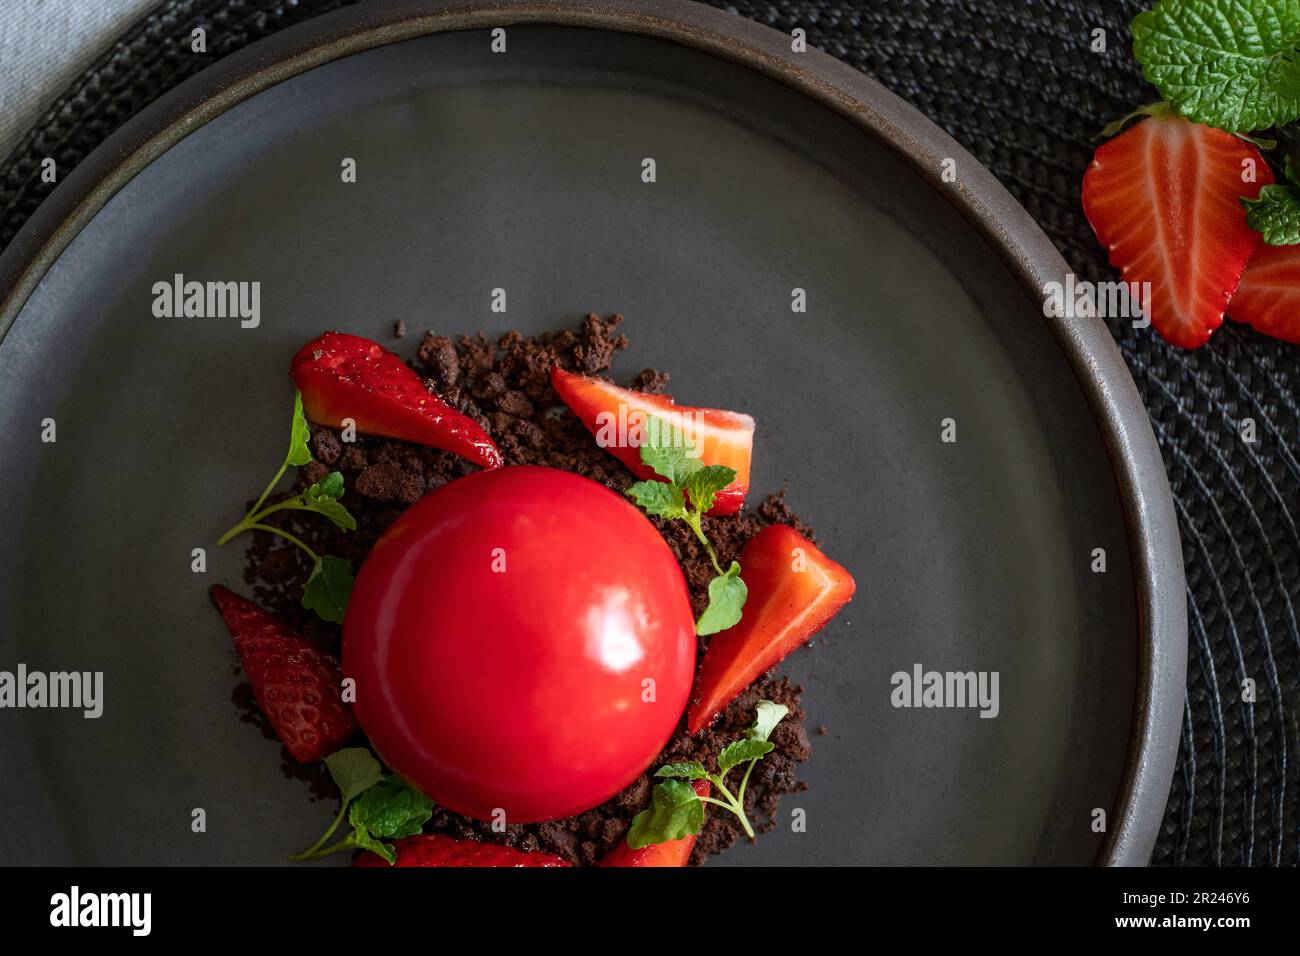 Selective focus of strawberries on the brownie crumbs. Sphere curd cake with smooth surfaces and mirror glaze. Red dessert on the black plate. Stock Photo